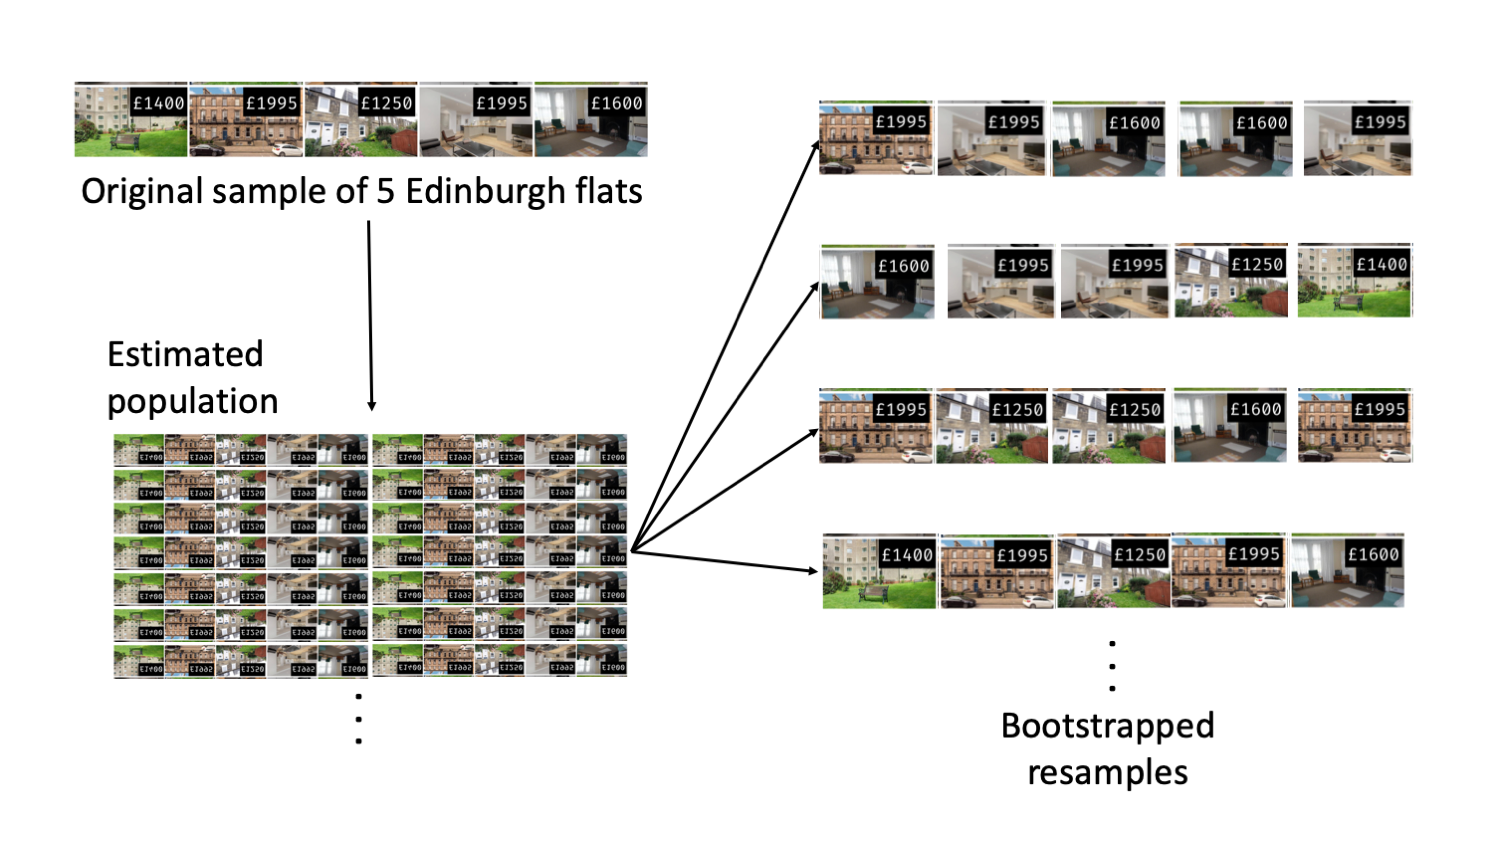 Using the original sample of five Edinburgh flats to generate an estimated population, which is then used to generate bootstrapped resamples. This process of generating a bootstrapped sample is equivalent to sampling five flats from the original sample, with replacement.